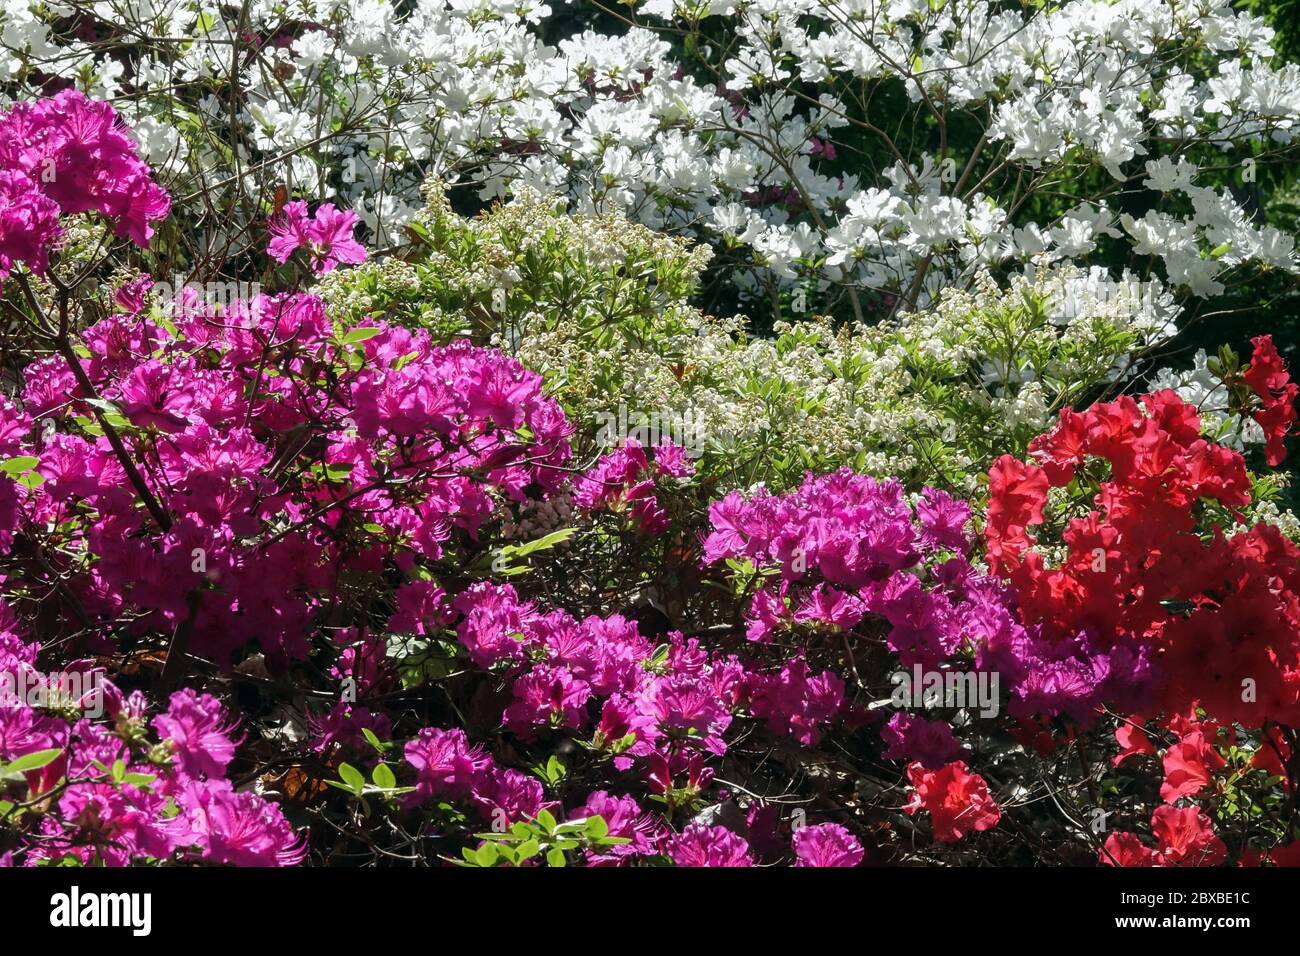 Colorful Rhododendrons Azalea obtusum Rhododendron Purple Red White Flowers Blooming Garden Flowering Shrubs Colourful Mixed Colorful Blooms Spring Stock Photo